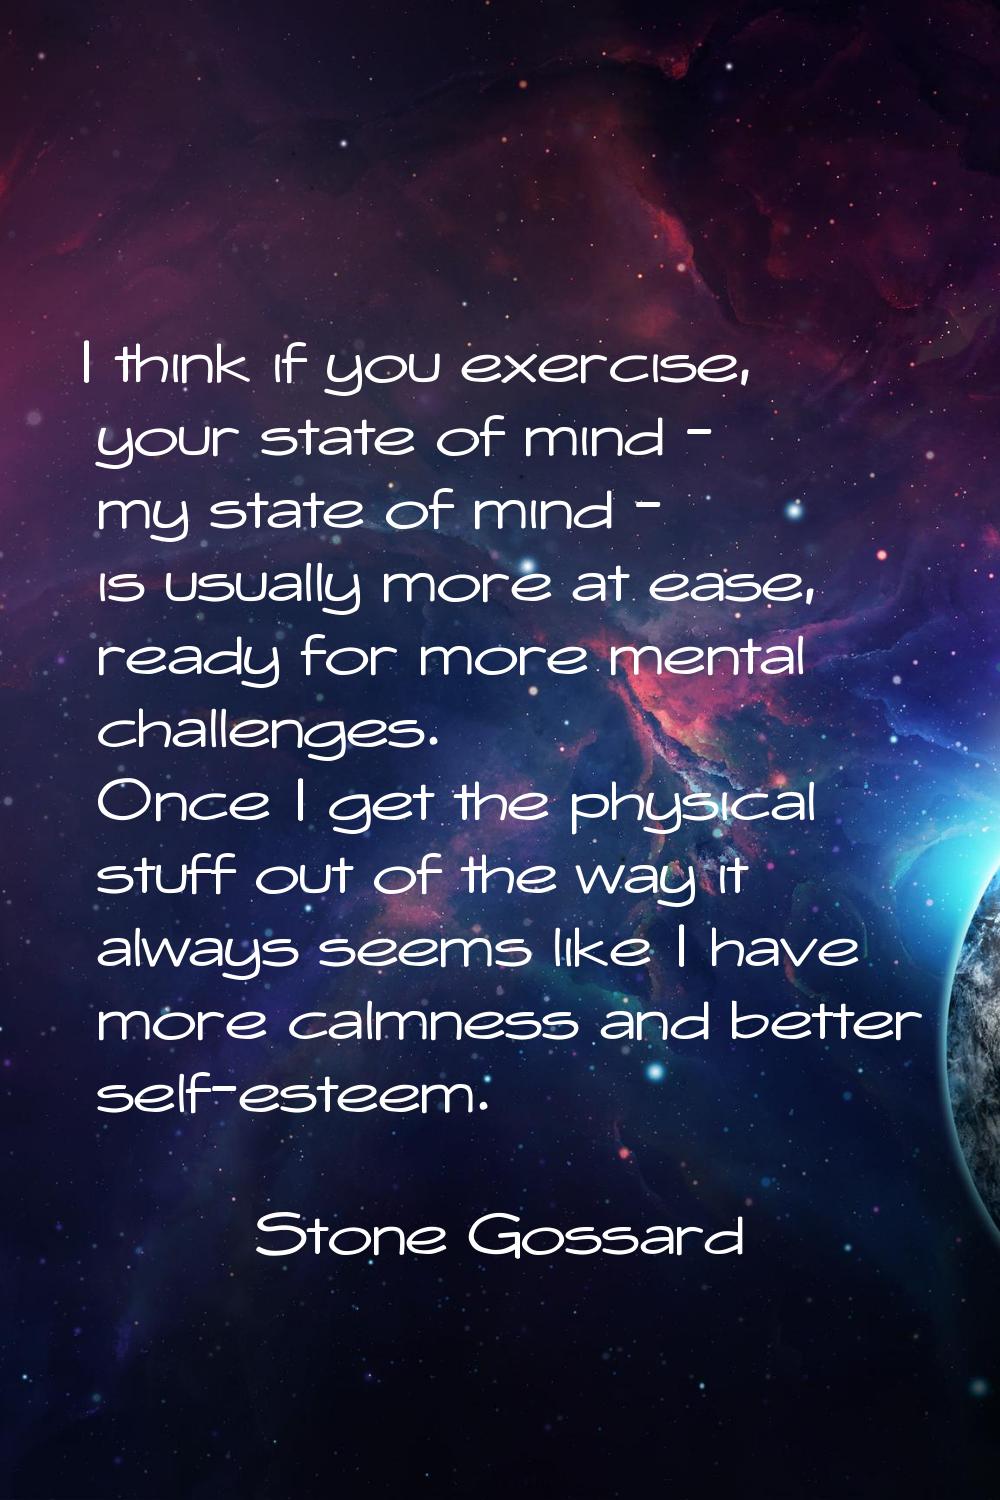 I think if you exercise, your state of mind - my state of mind - is usually more at ease, ready for